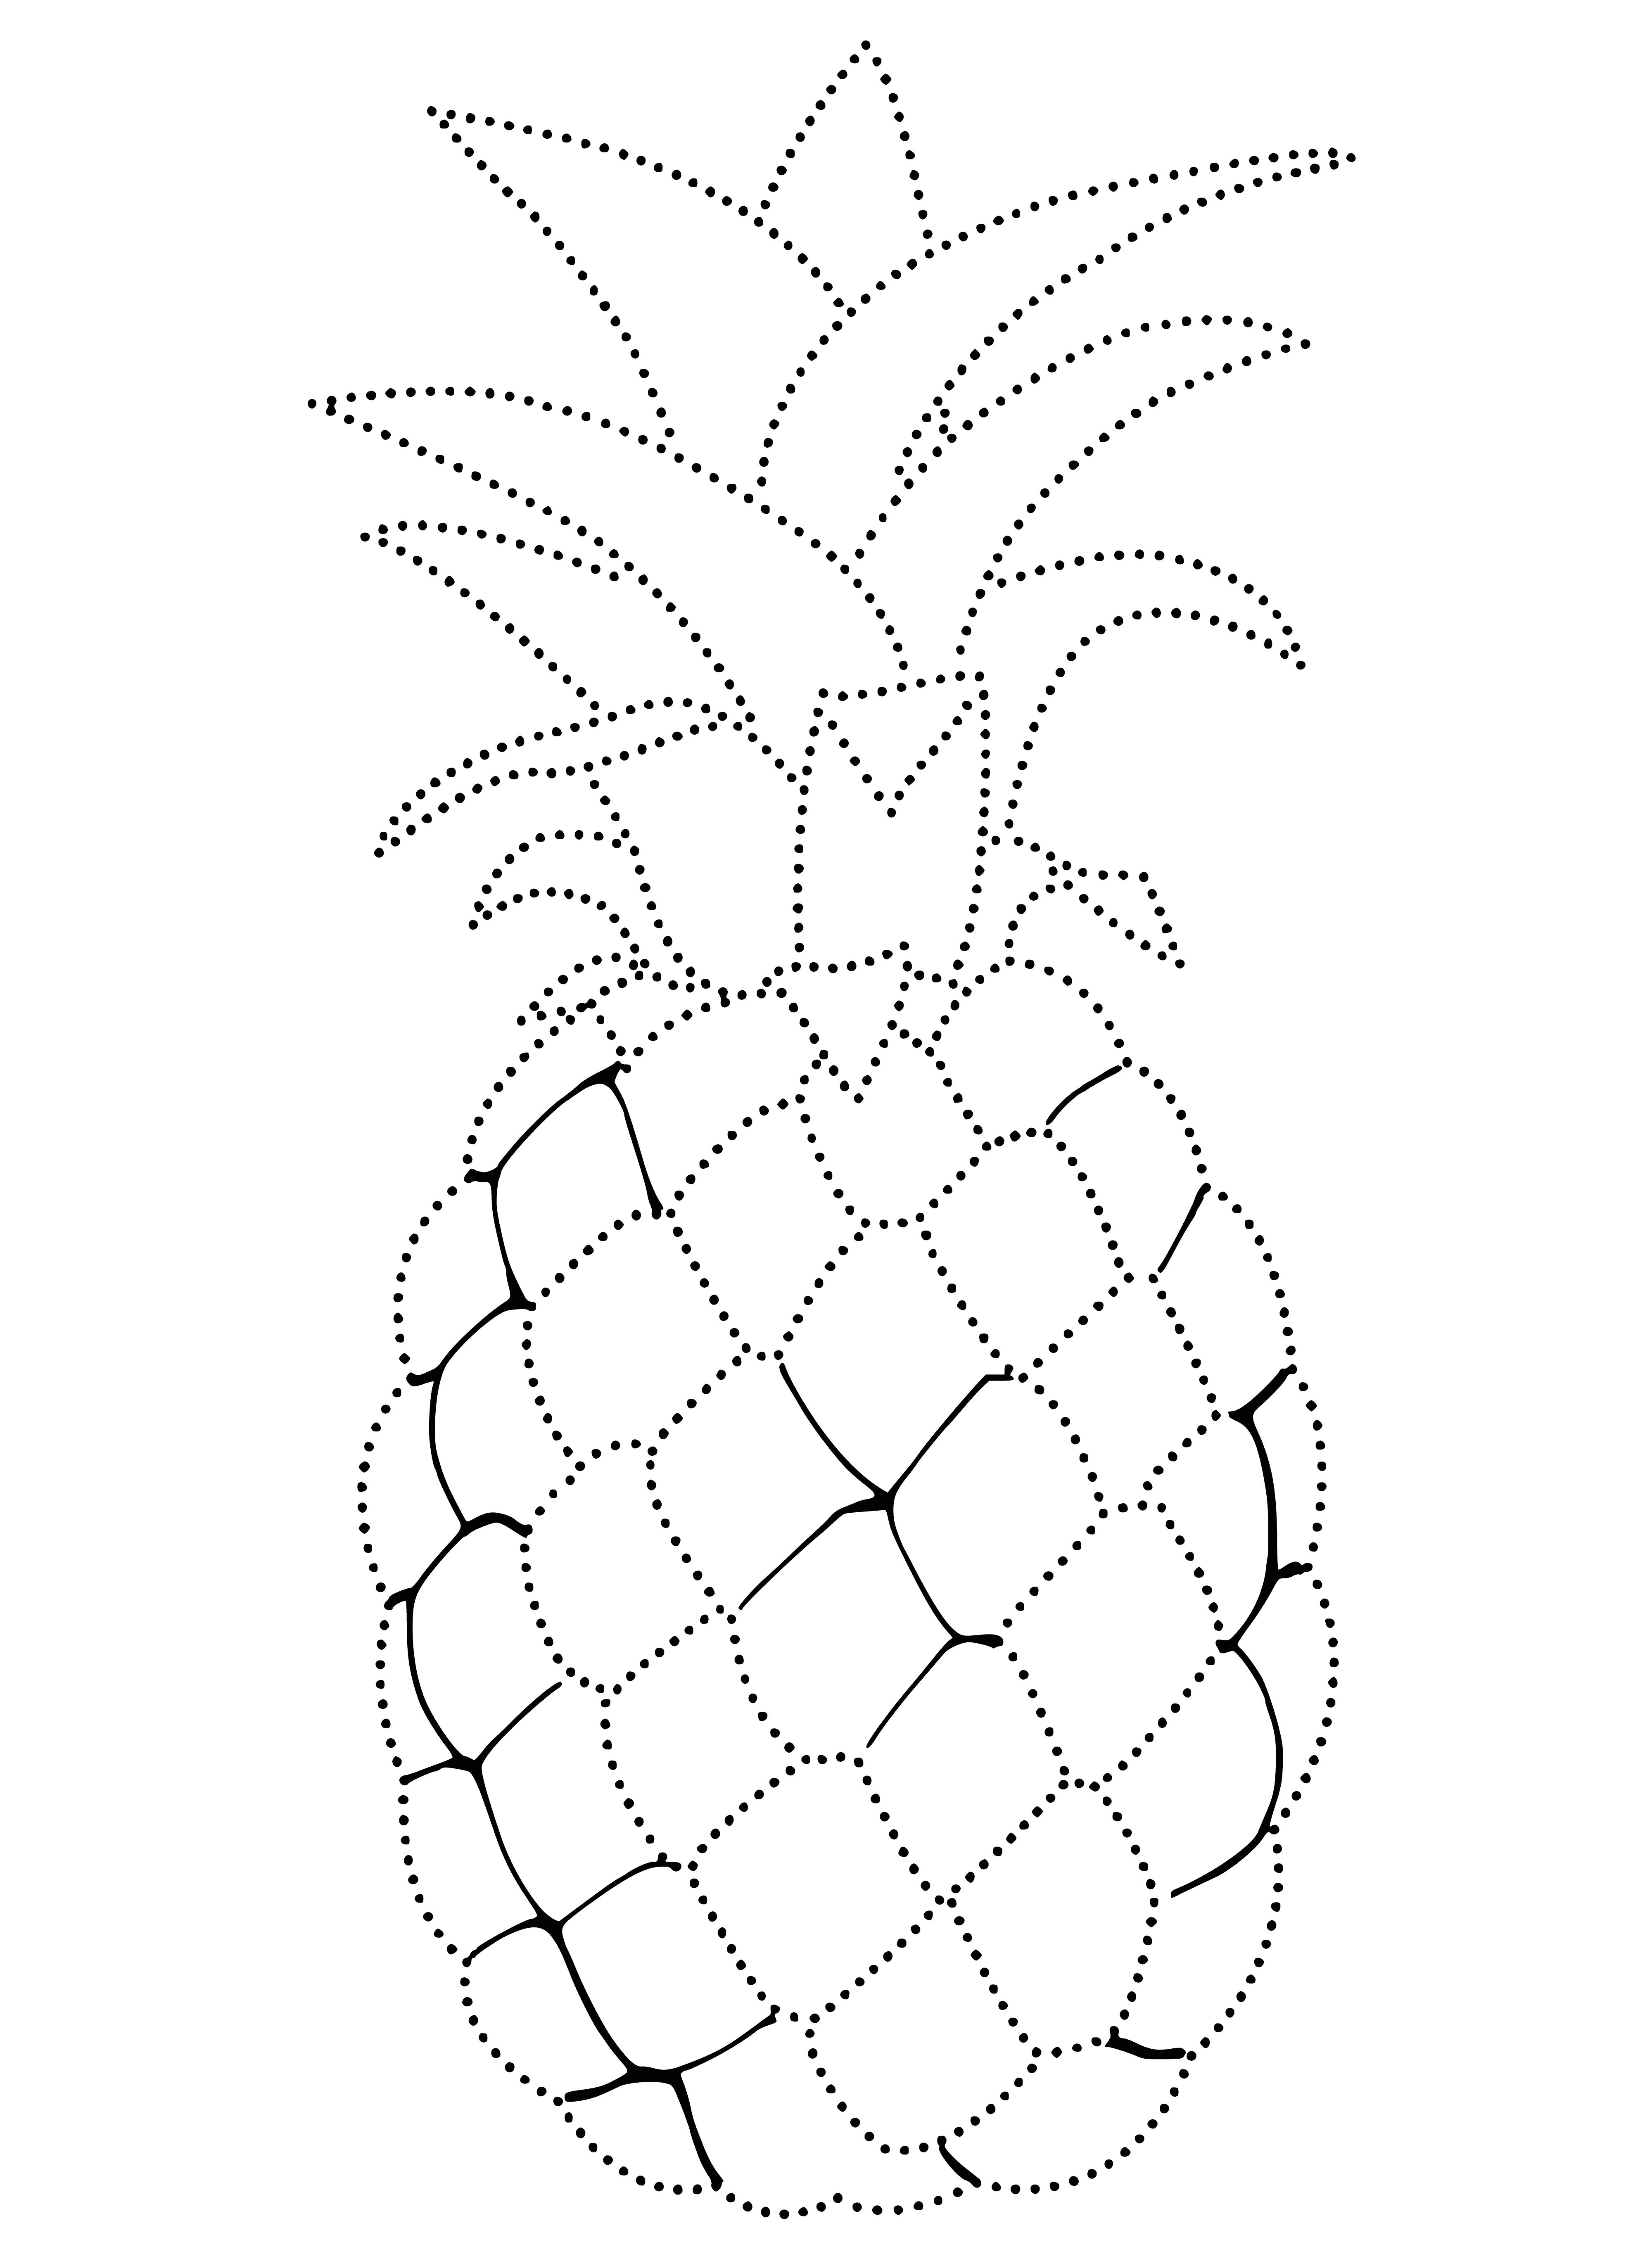 Pineapple coloring page